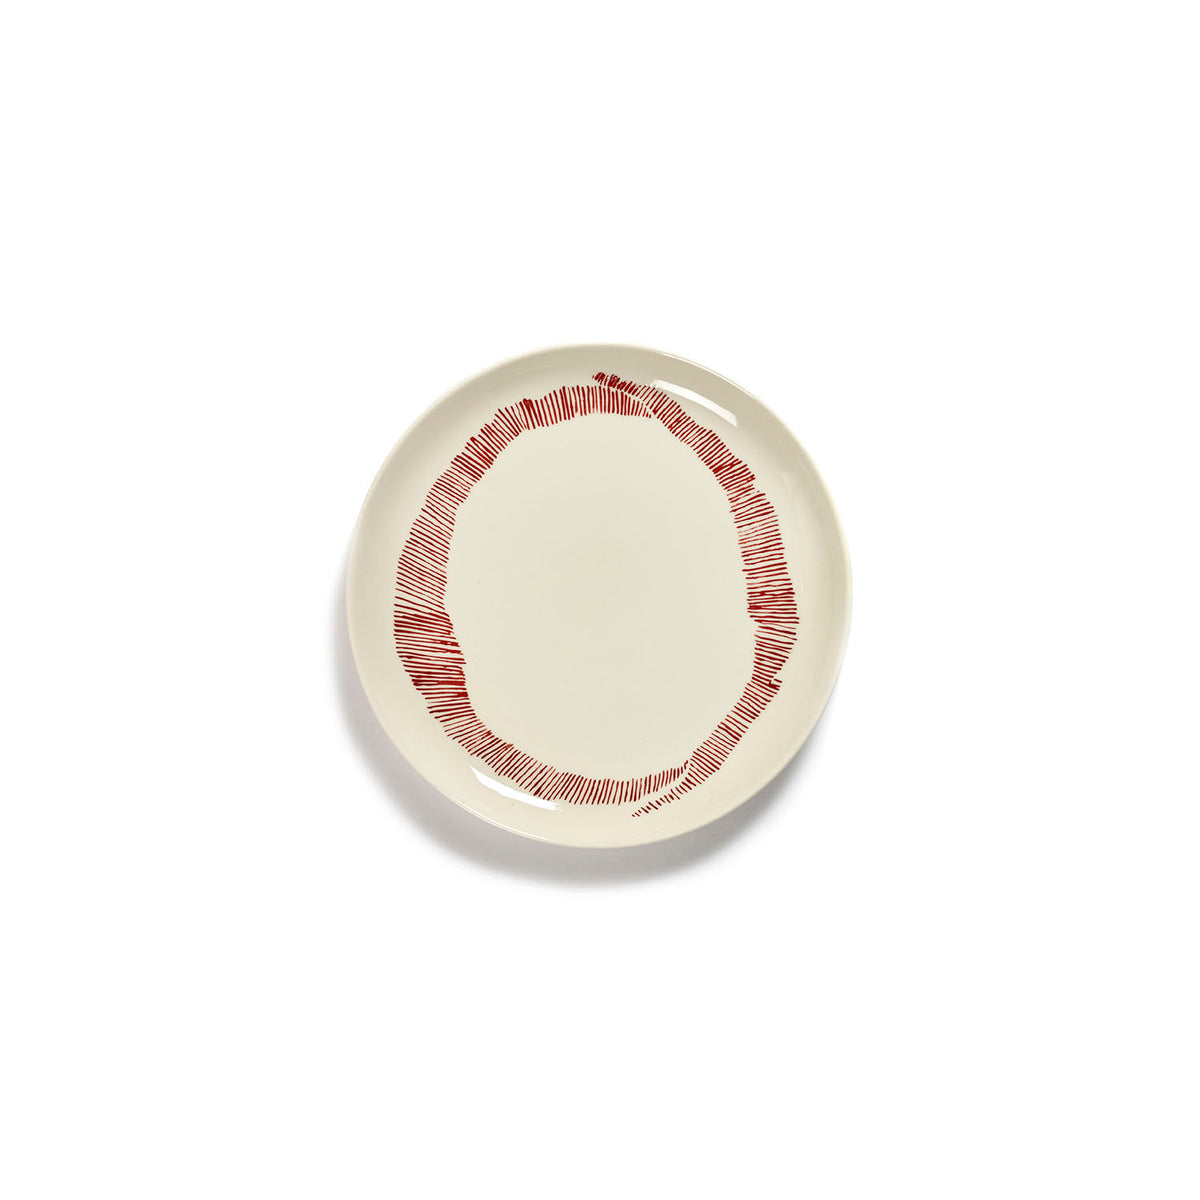 Ottolenghi for Serax Feast collection; medium plate, with white swirl-stripes red design.